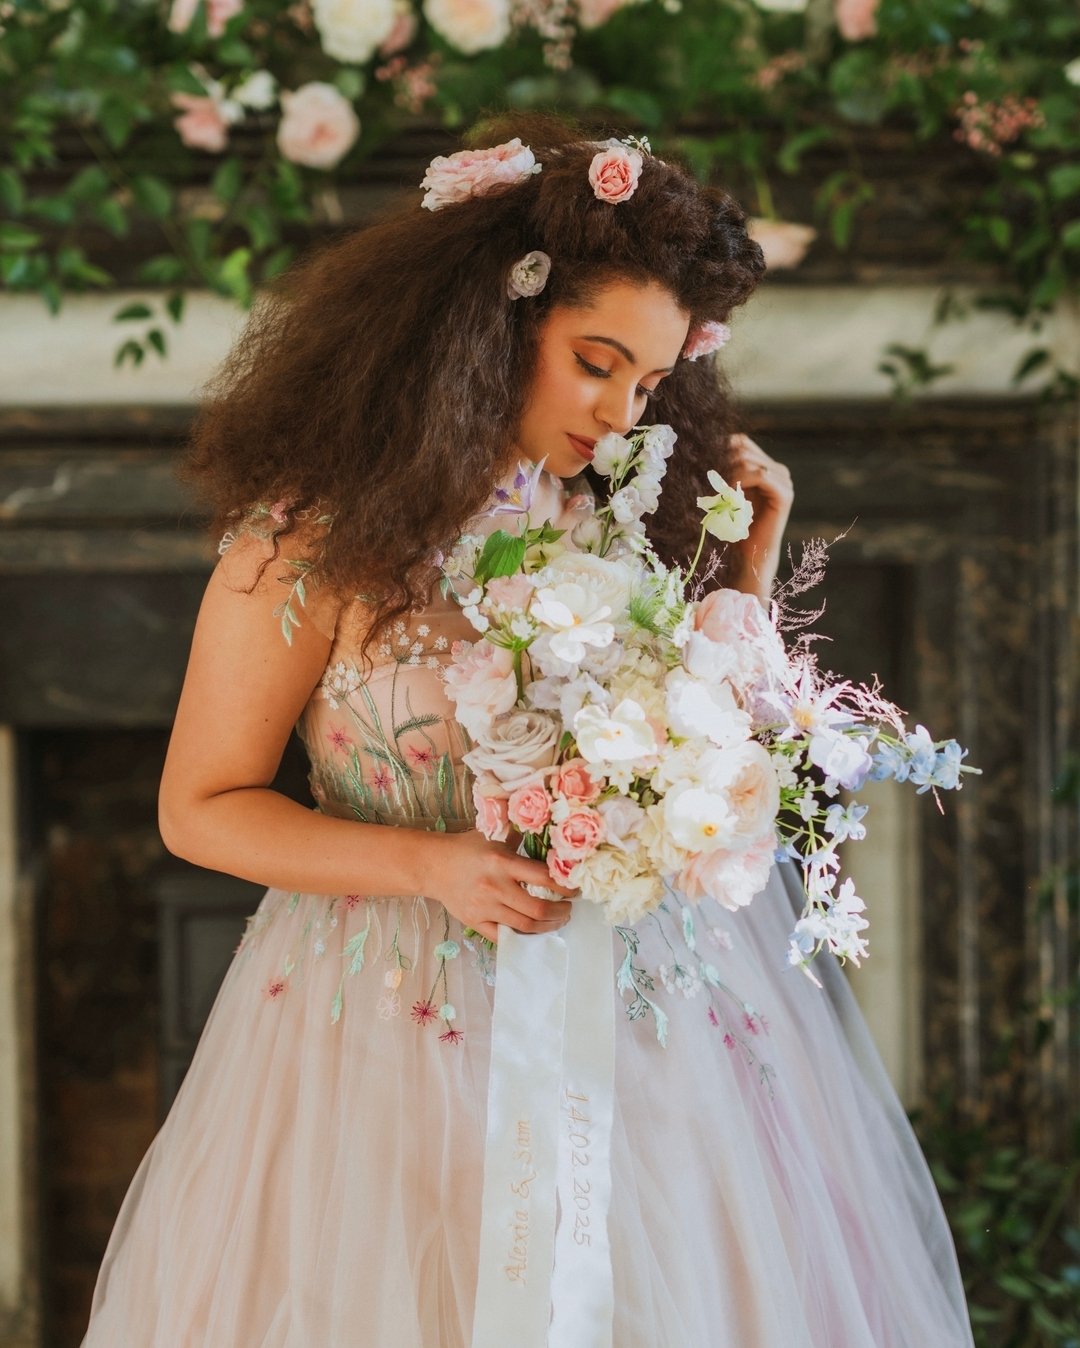 A moment with the flowers. 🌸

Love the romantic yet fun vibe of this beautiful styled shoot 💫

With love and thanks to everyone who pulled this fabulous day together. They really are the best, so do reach out if you&rsquo;re looking for any help fo